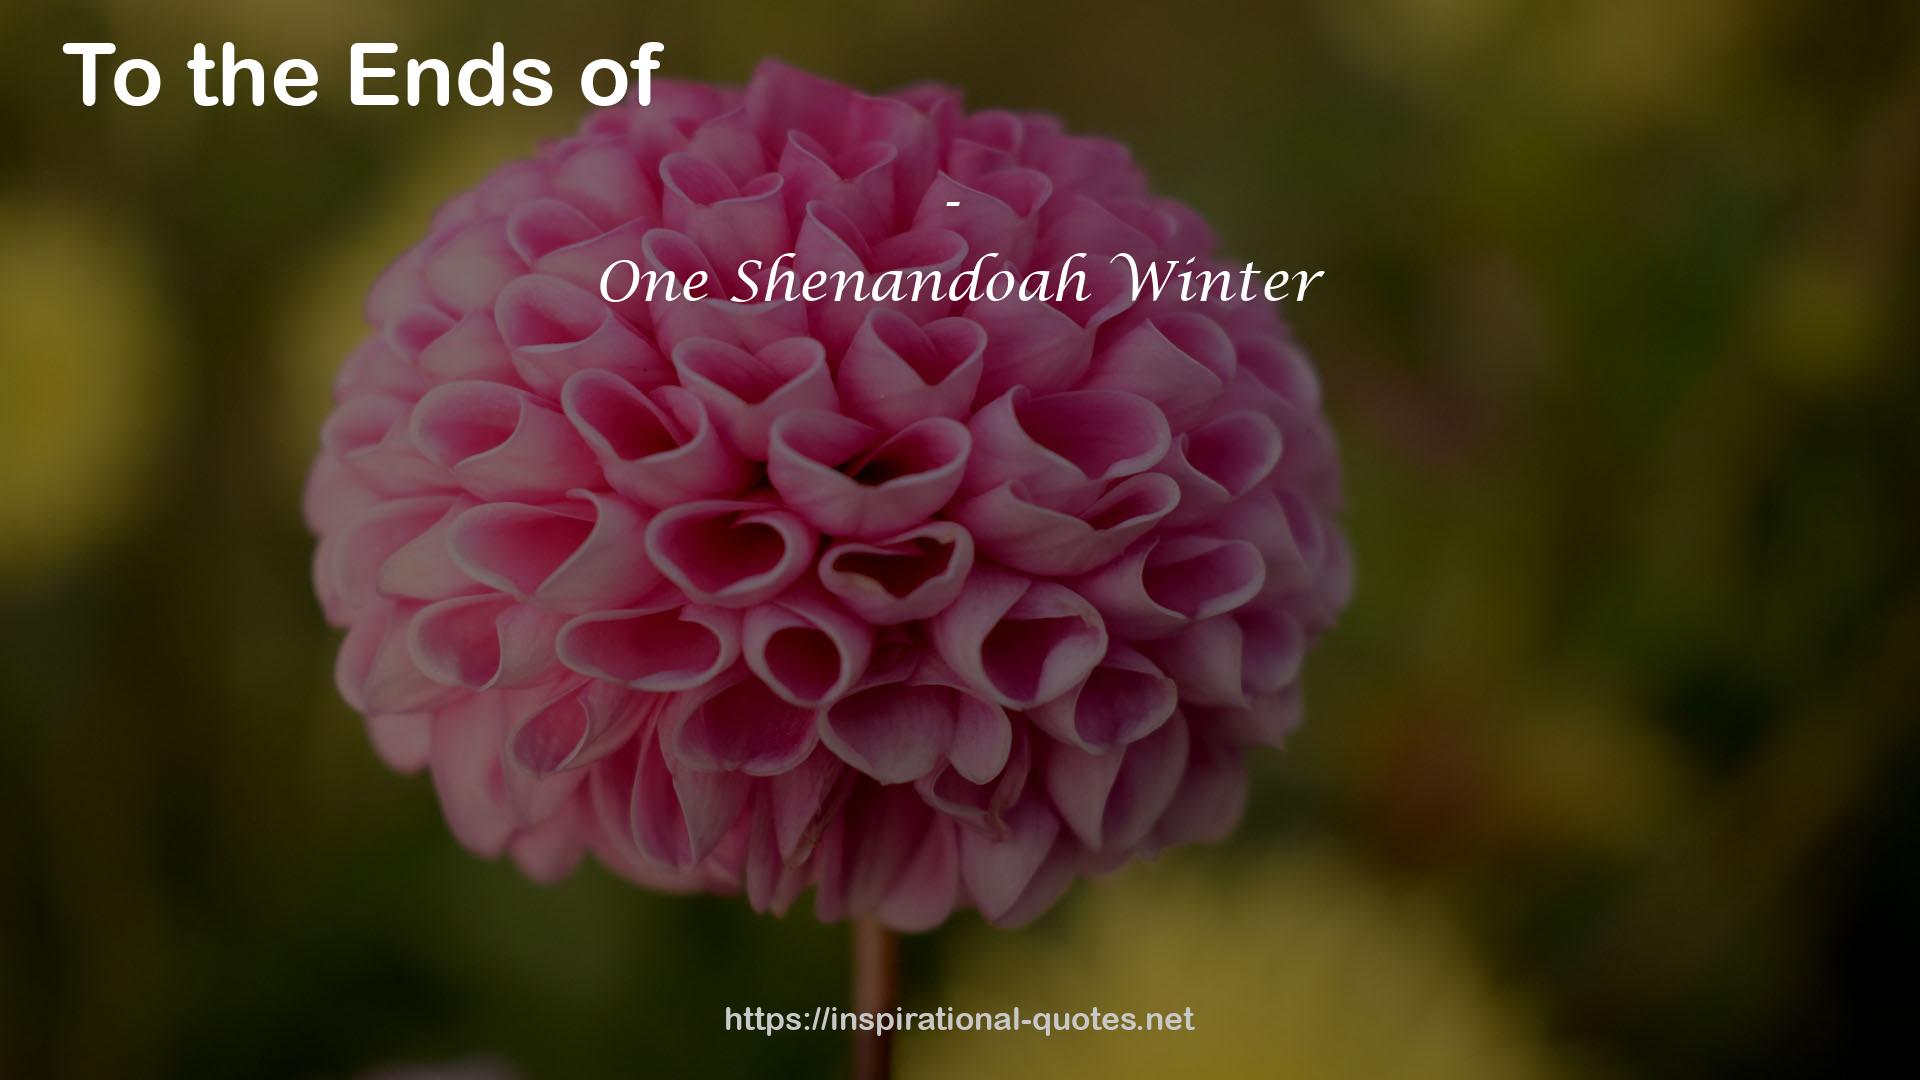 One Shenandoah Winter QUOTES